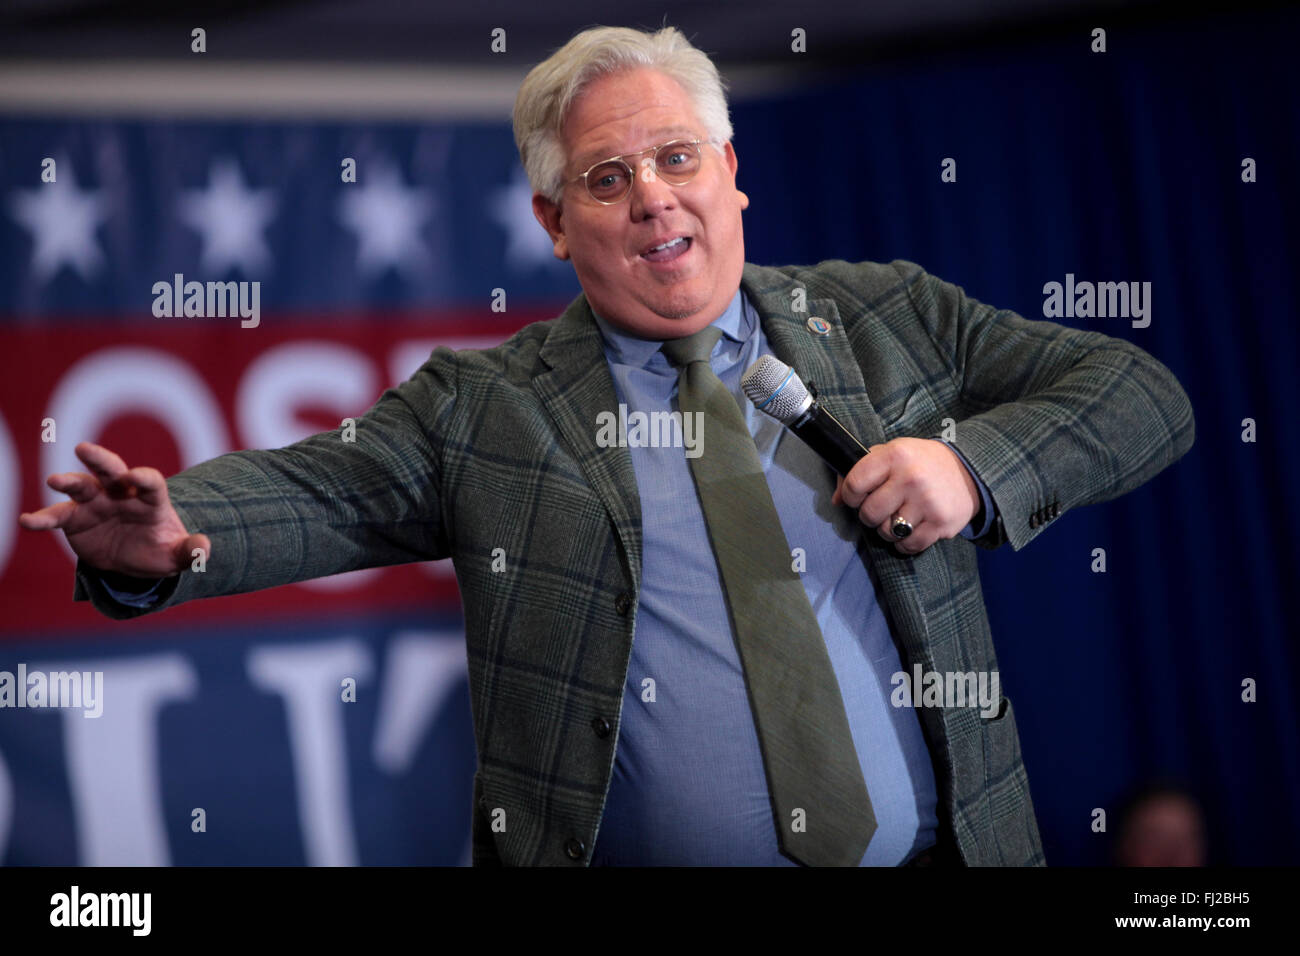 Conservative commentator Glenn Beck during the Nevada Courageous Conservatives rally with Republican presidential candidate Senator Ted Cruz hosted by Keep the Promise PAC at the Henderson Convention Center February 21, 2016 in Henderson, Nevada. Stock Photo